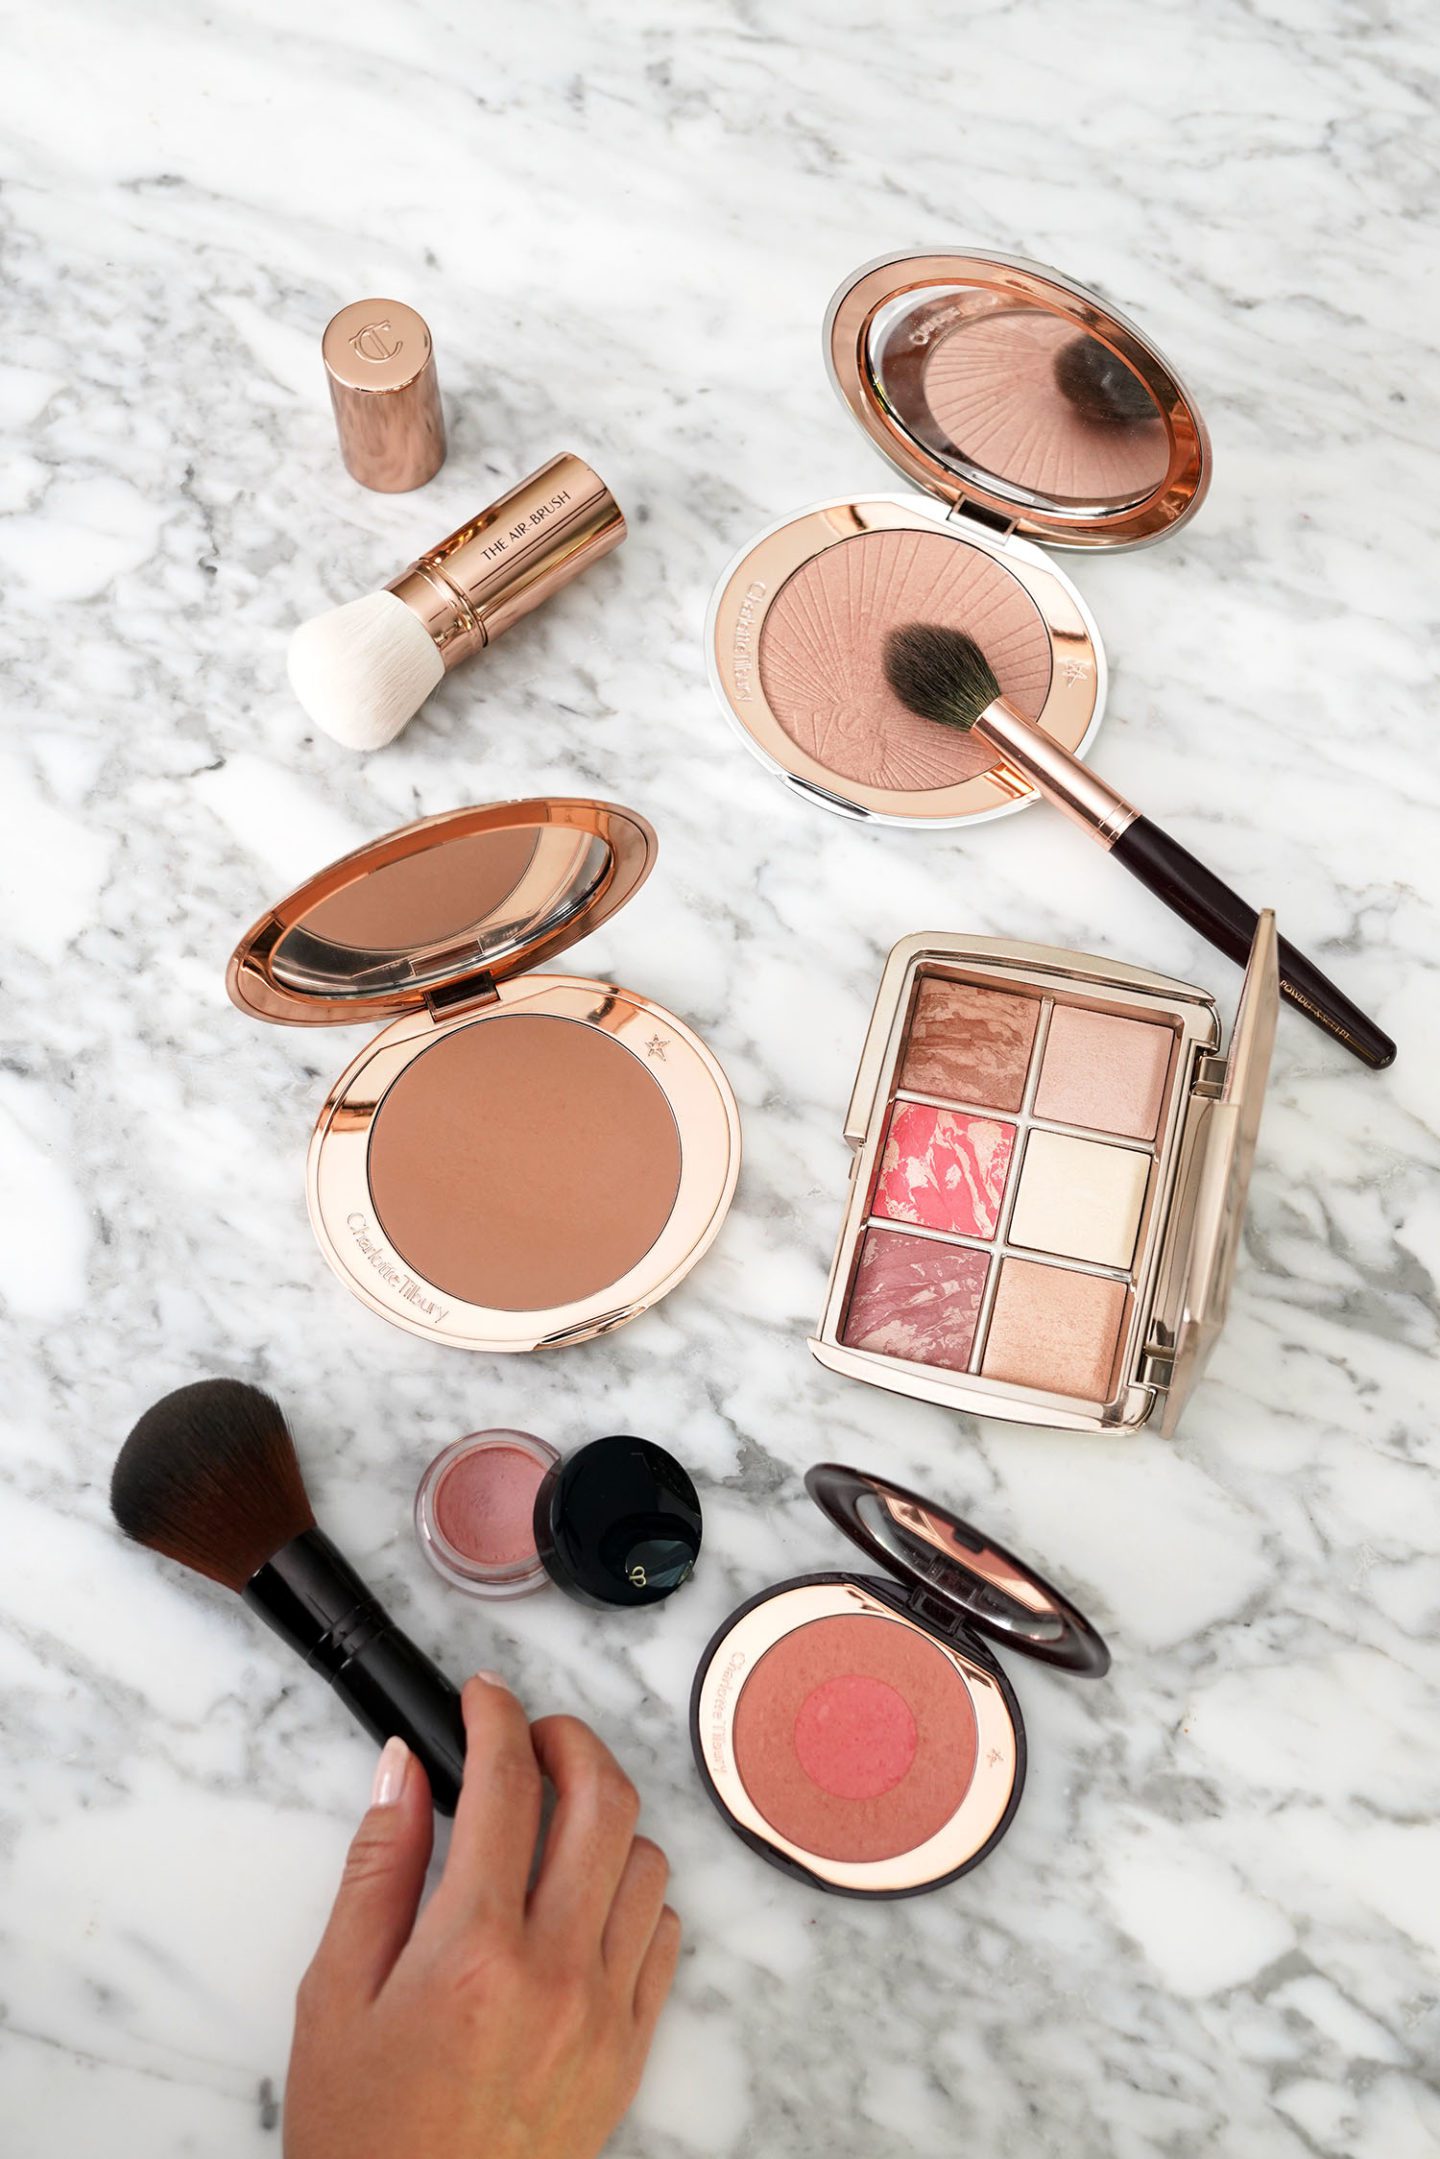 Best Glowy Blushes and Highlighter Palette Charlotte Tilbury + Hourglass